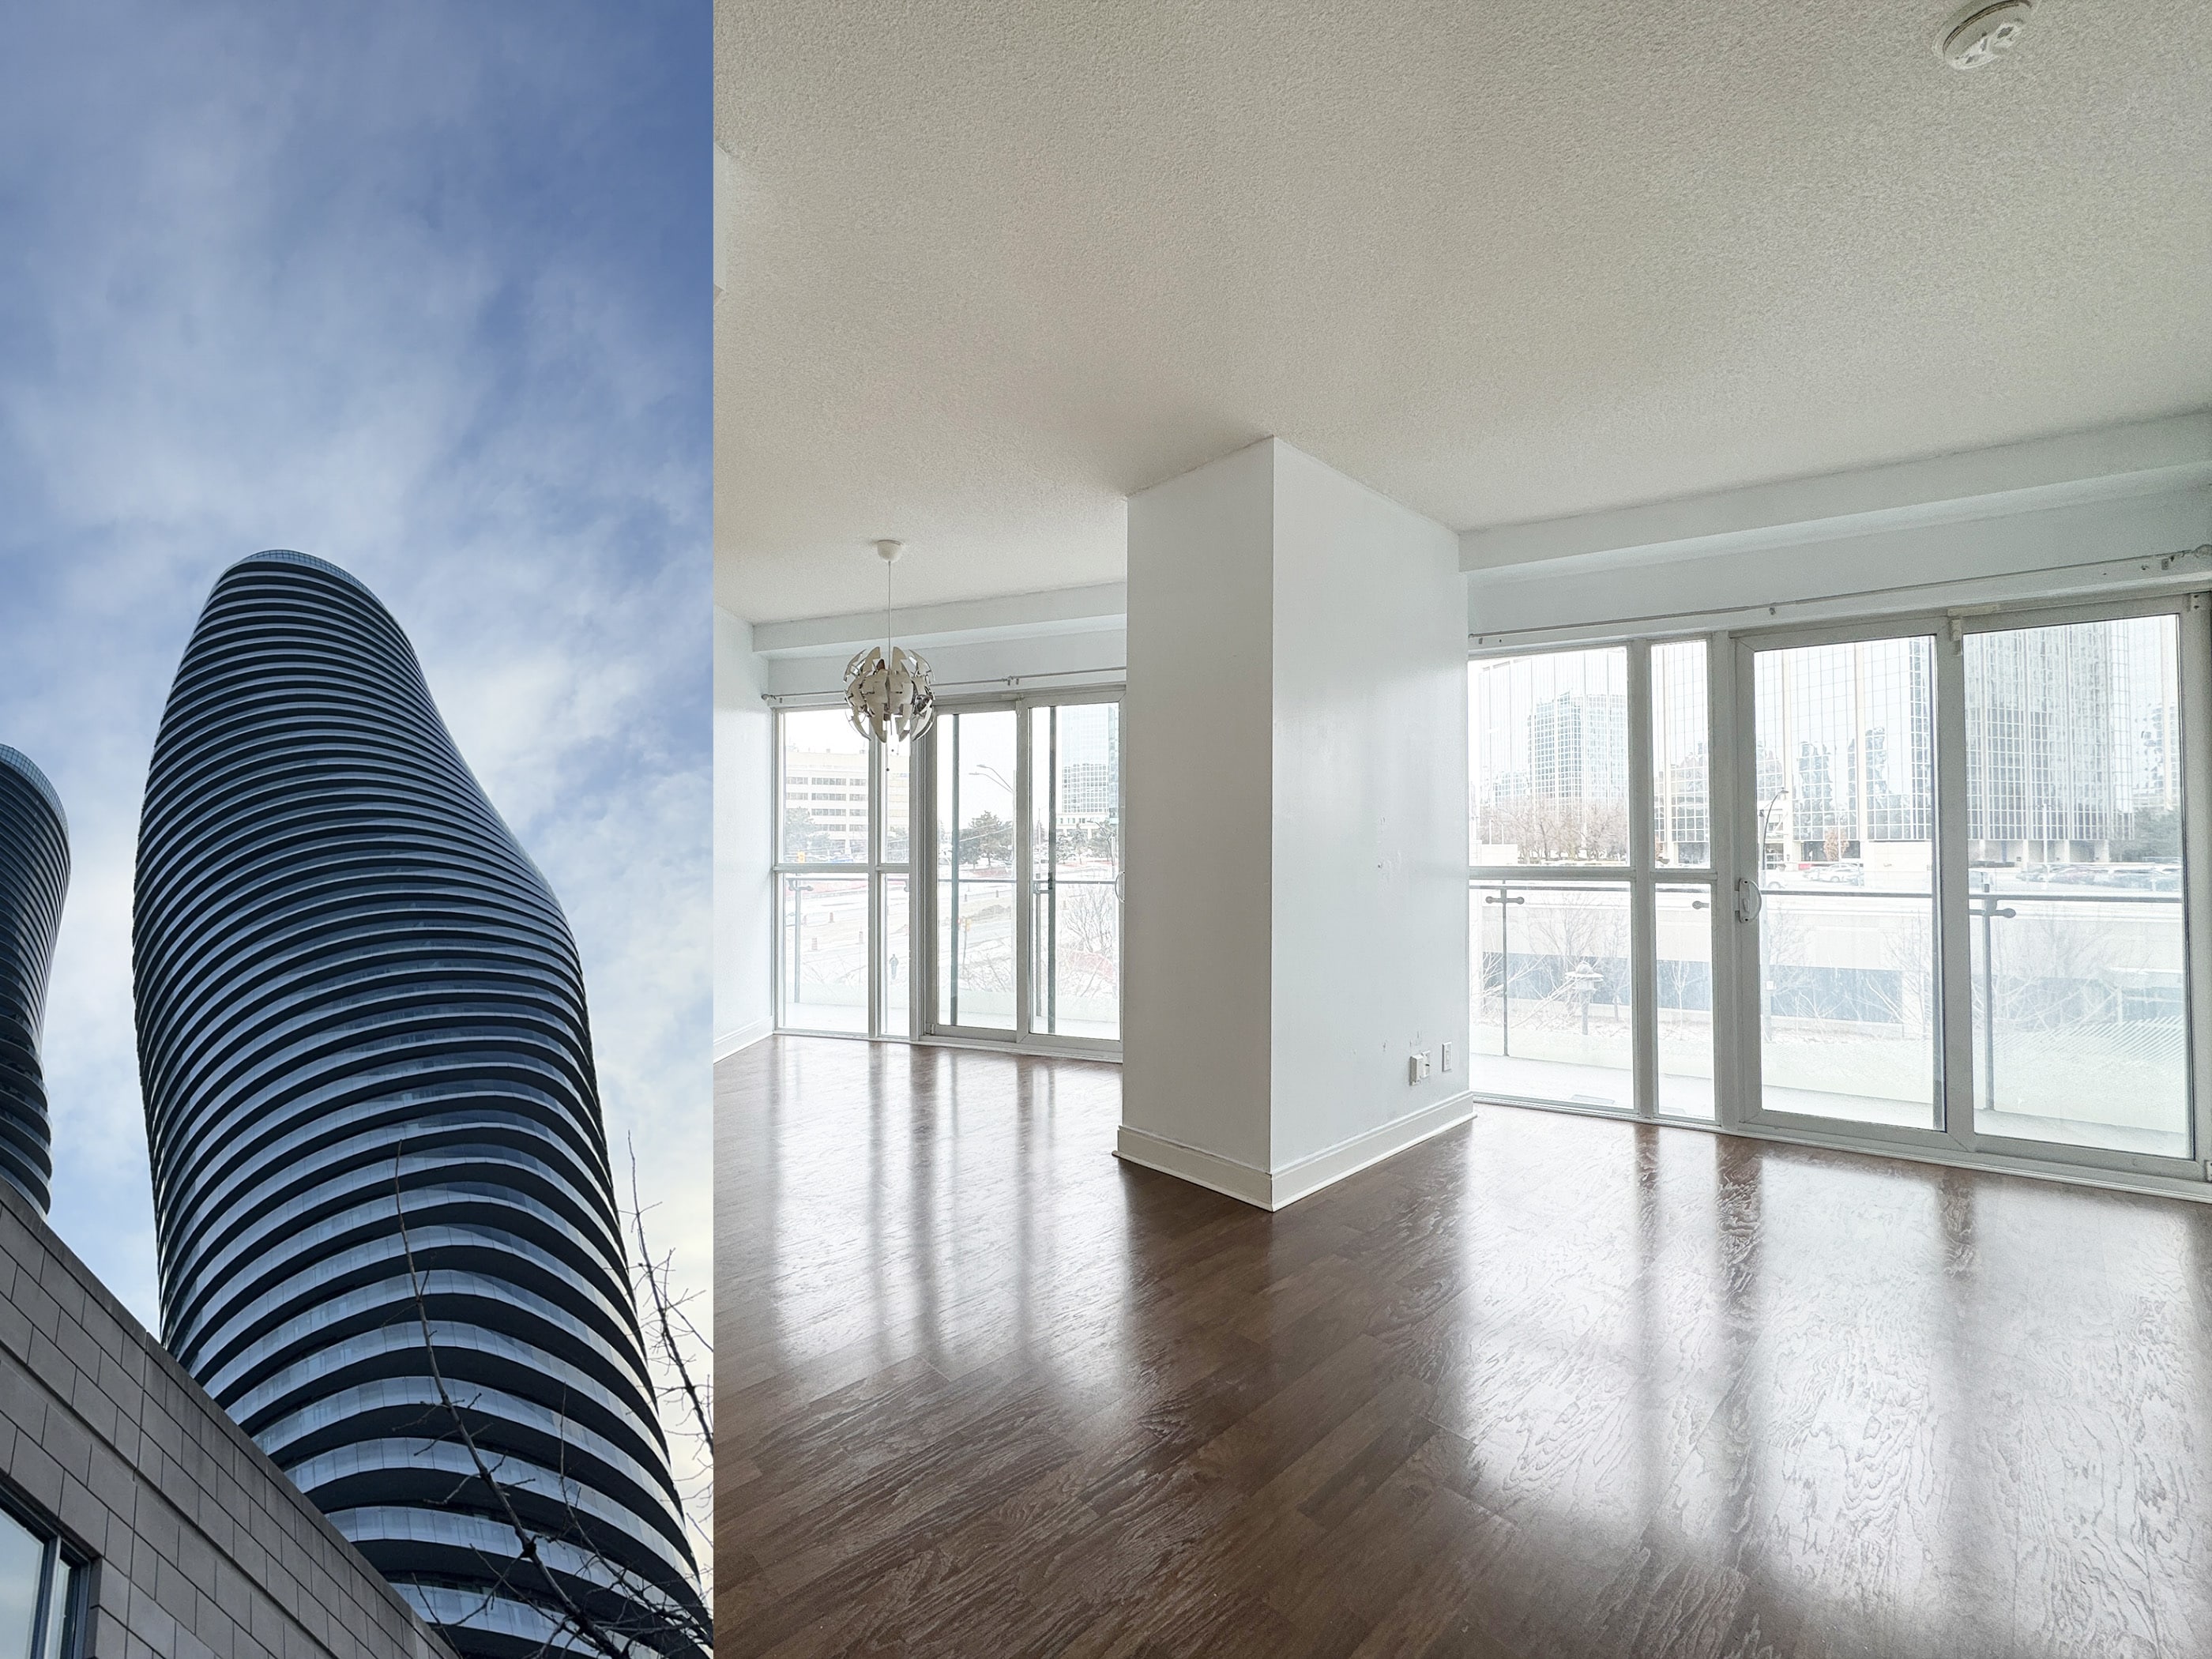 [object object] For Rent: Unit 205 at 50 Absolute Ave Mississauga 50 absolute ave mississauga condos for sale square one life